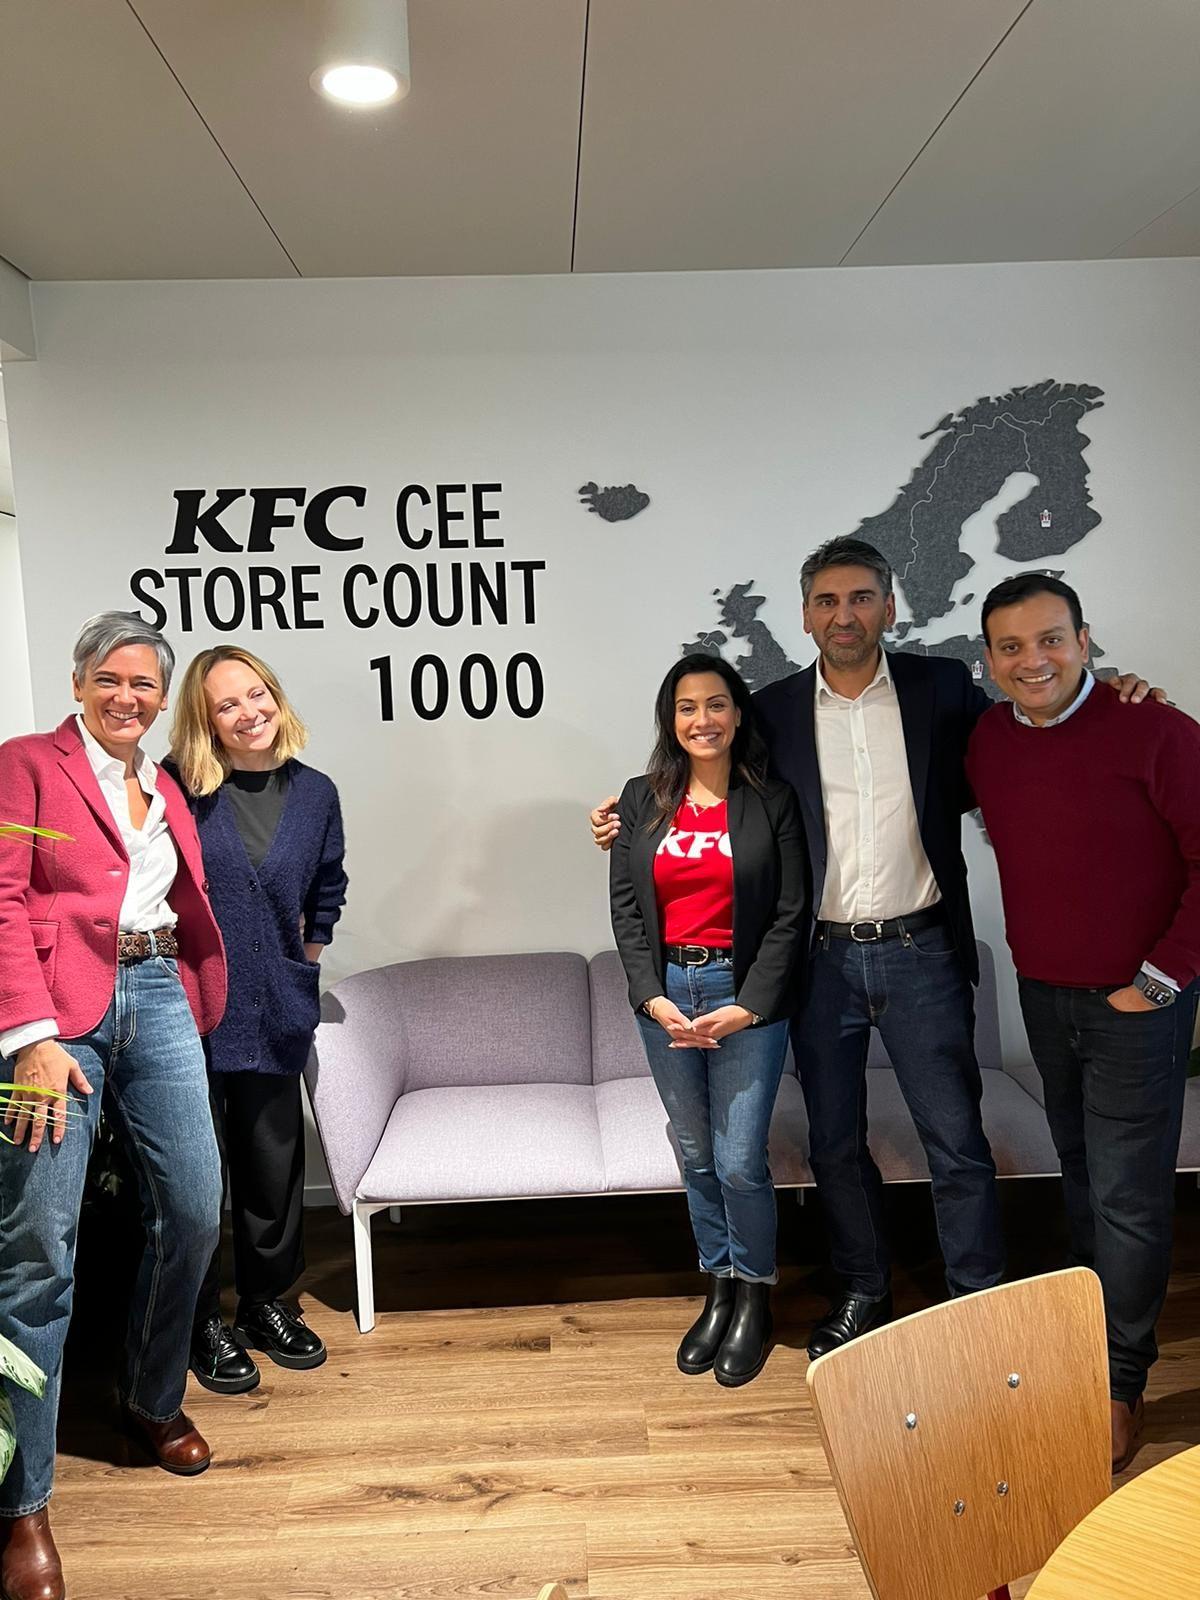 Five smiling people standing in a room with a couch and "KFC CEE store count 1000" on the wall behind them.